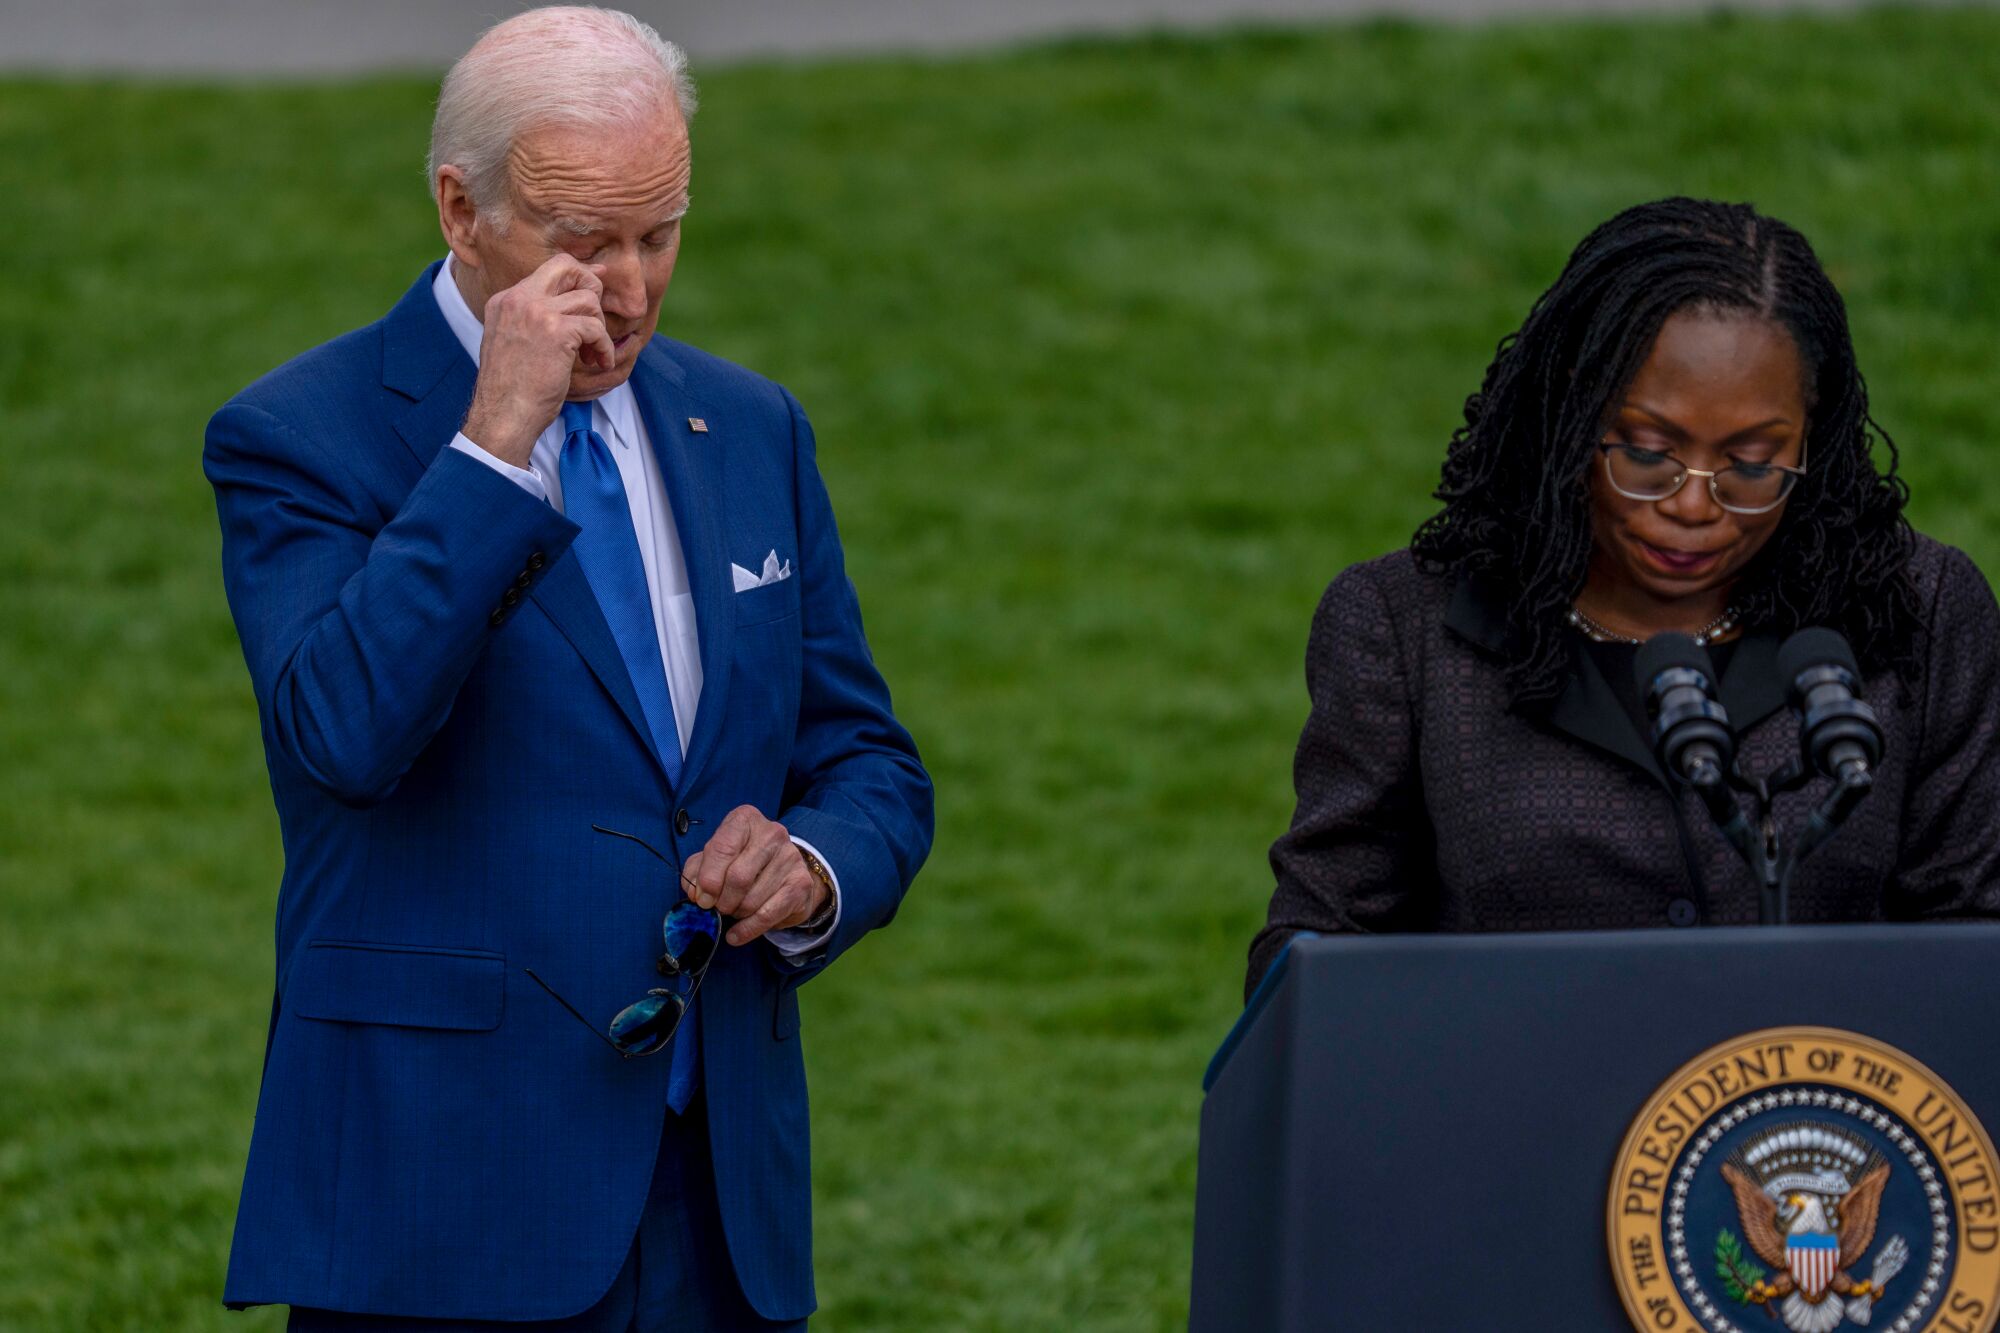 President Joe Biden wipes his eyes while Judge Ketanji Brown Jackson delivers remarks during an event on the South Lawn.